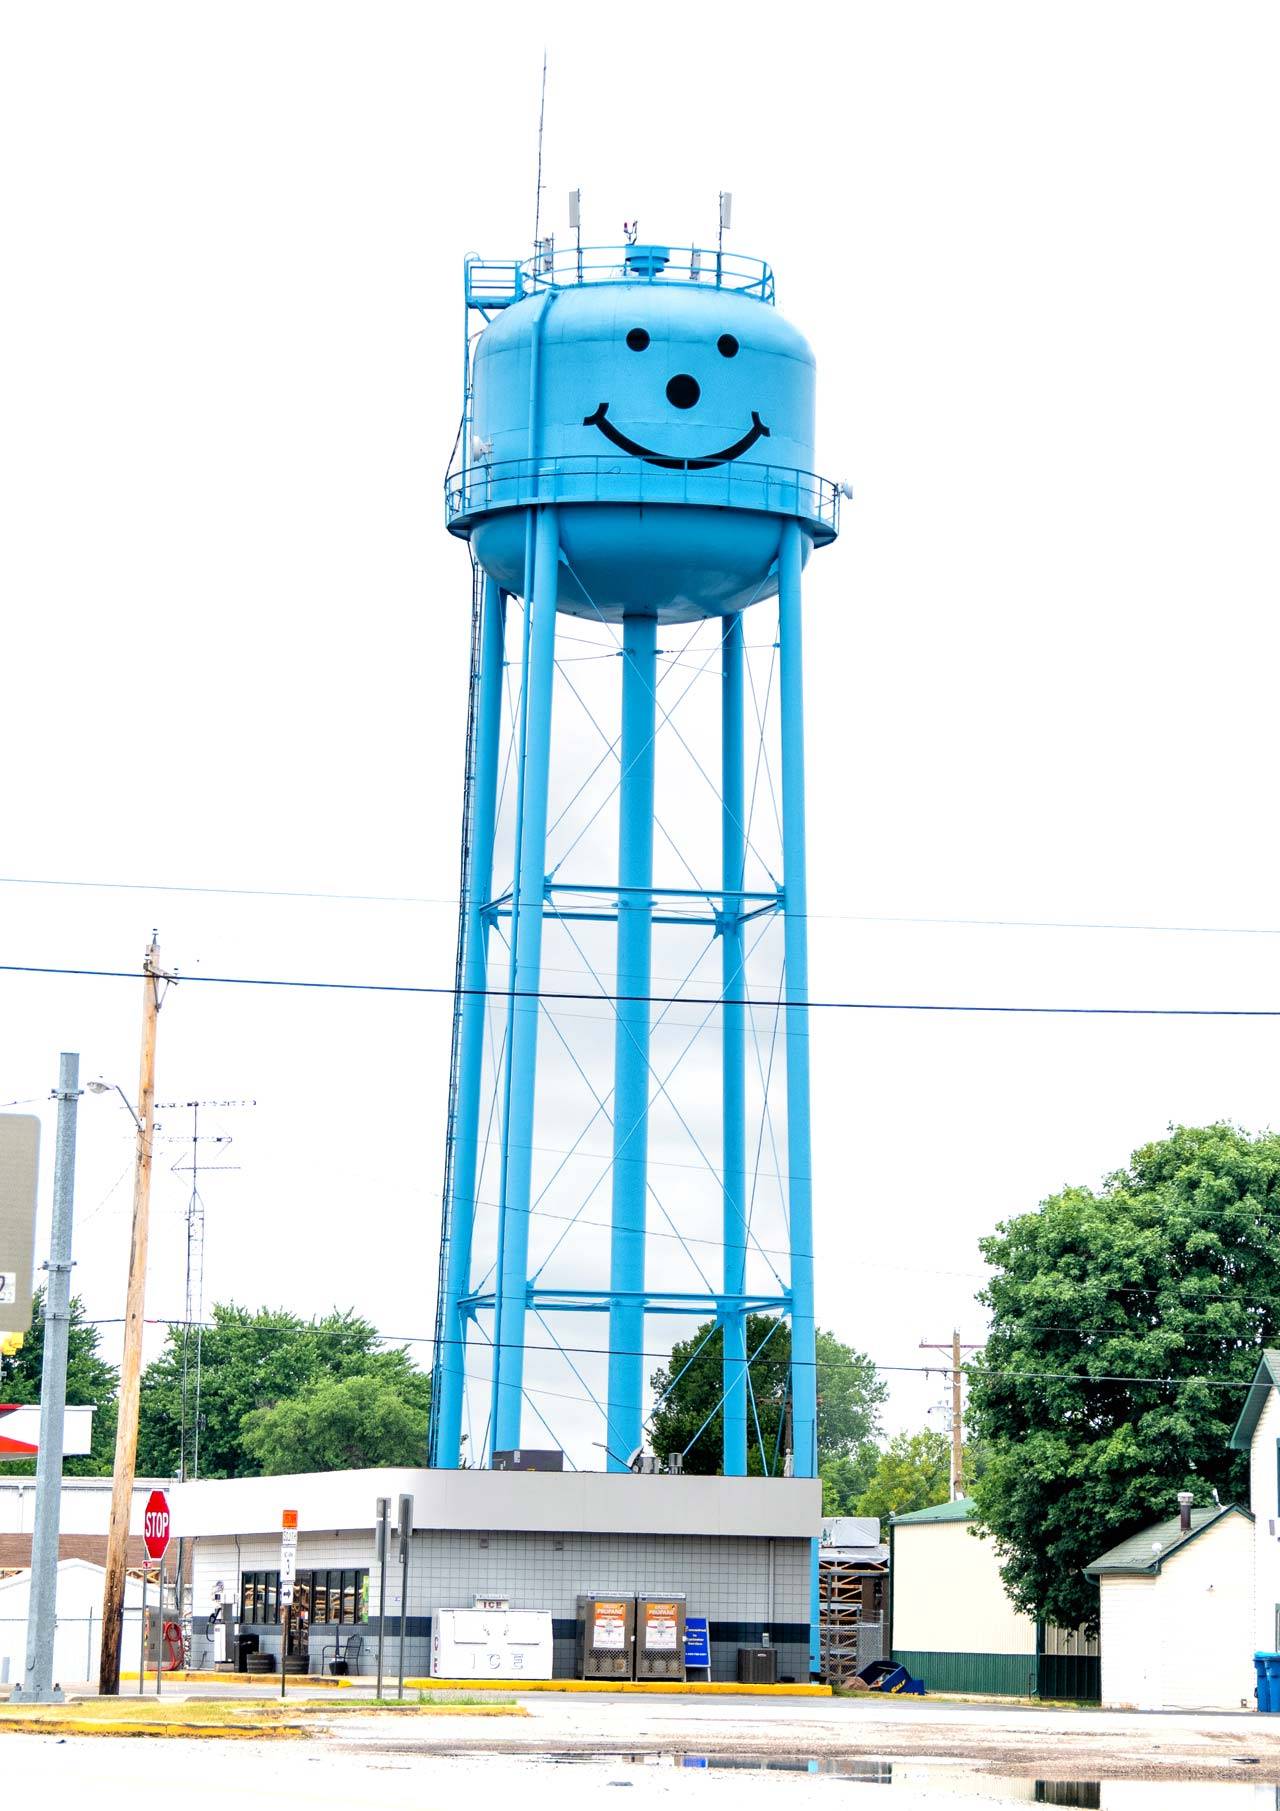 Markle water tower painted light blue with a large smiley face on it.